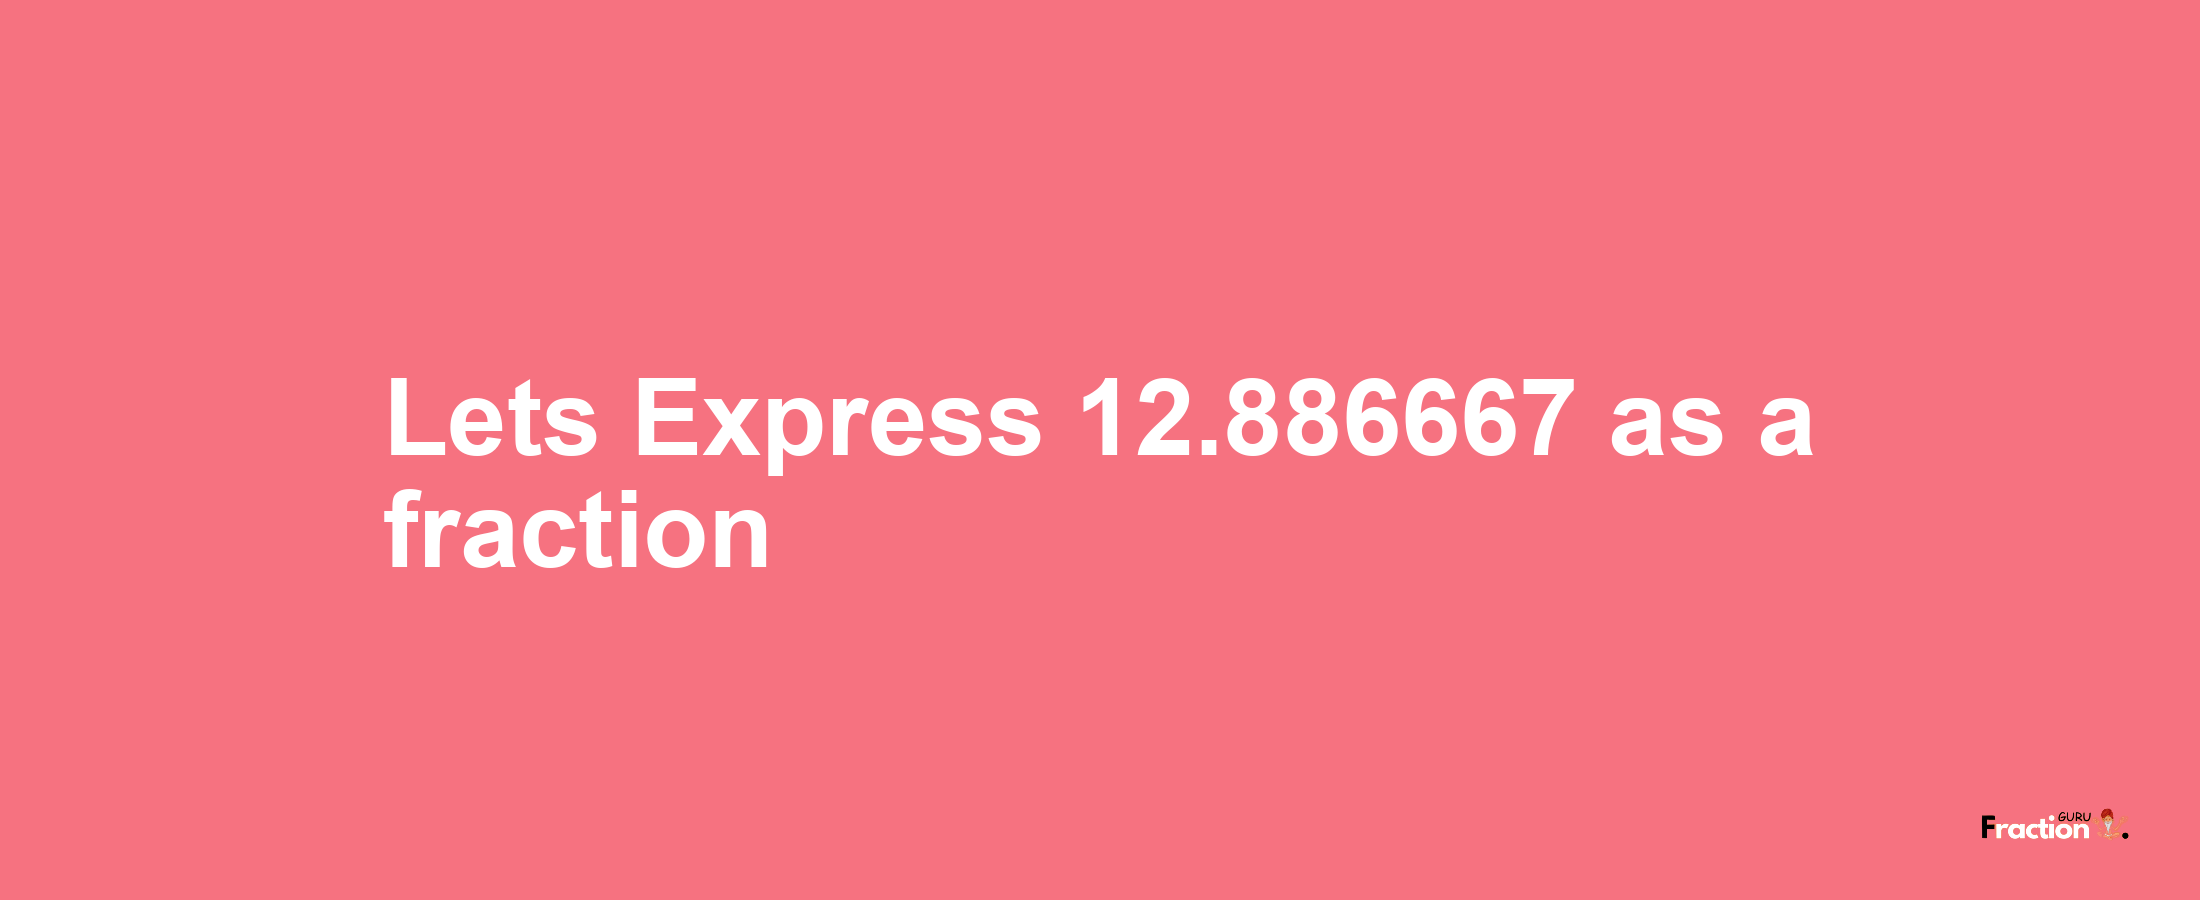 Lets Express 12.886667 as afraction